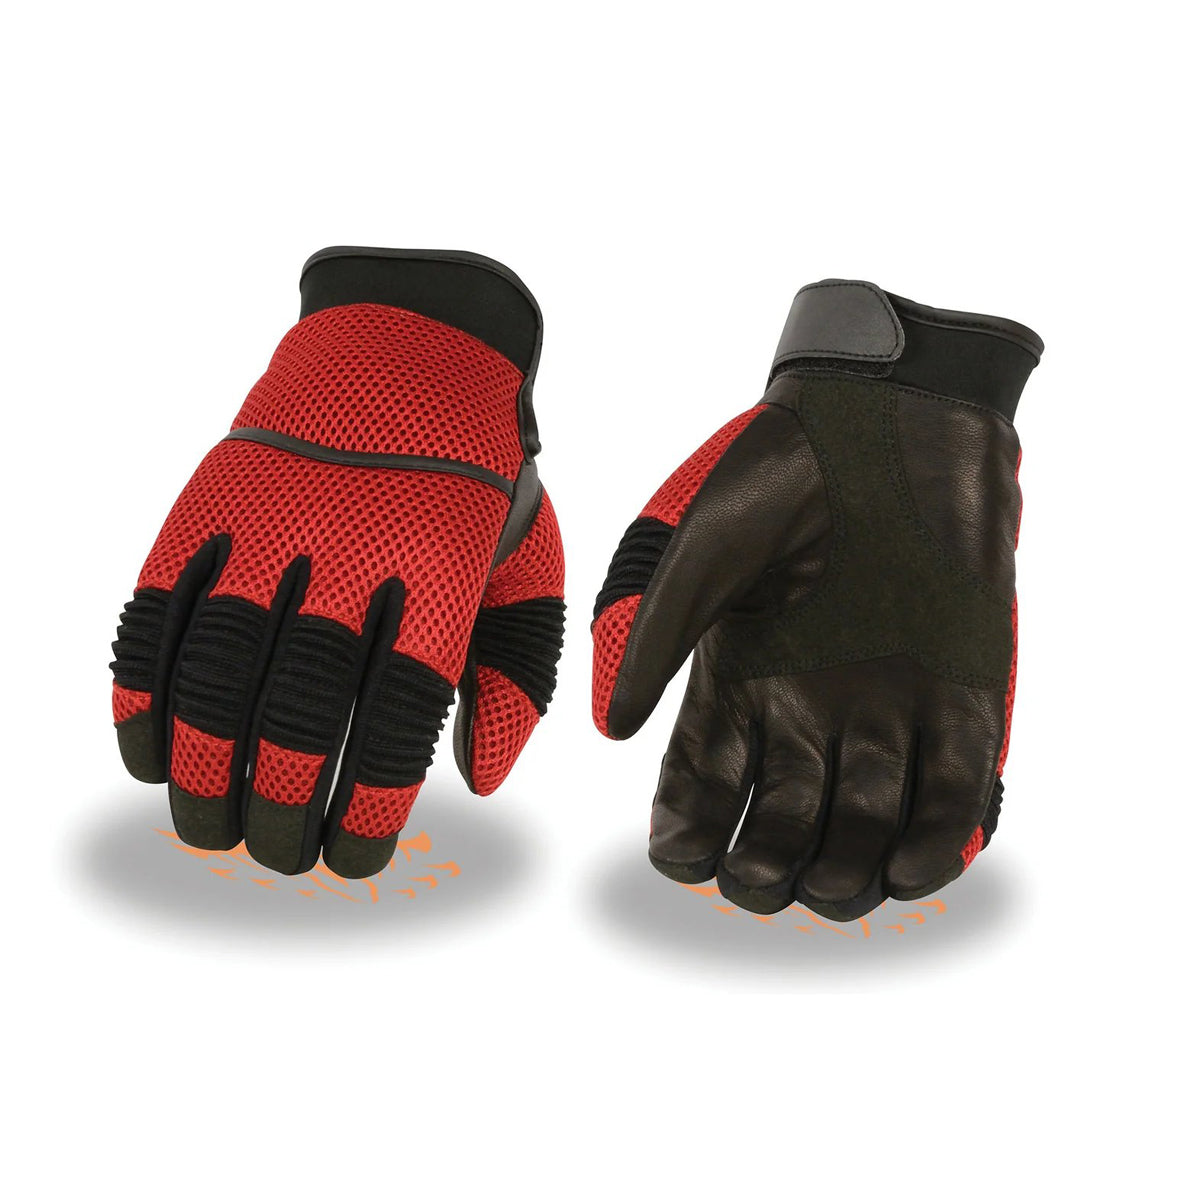 Men's Black and Red Mesh and Leather Racing Gloves